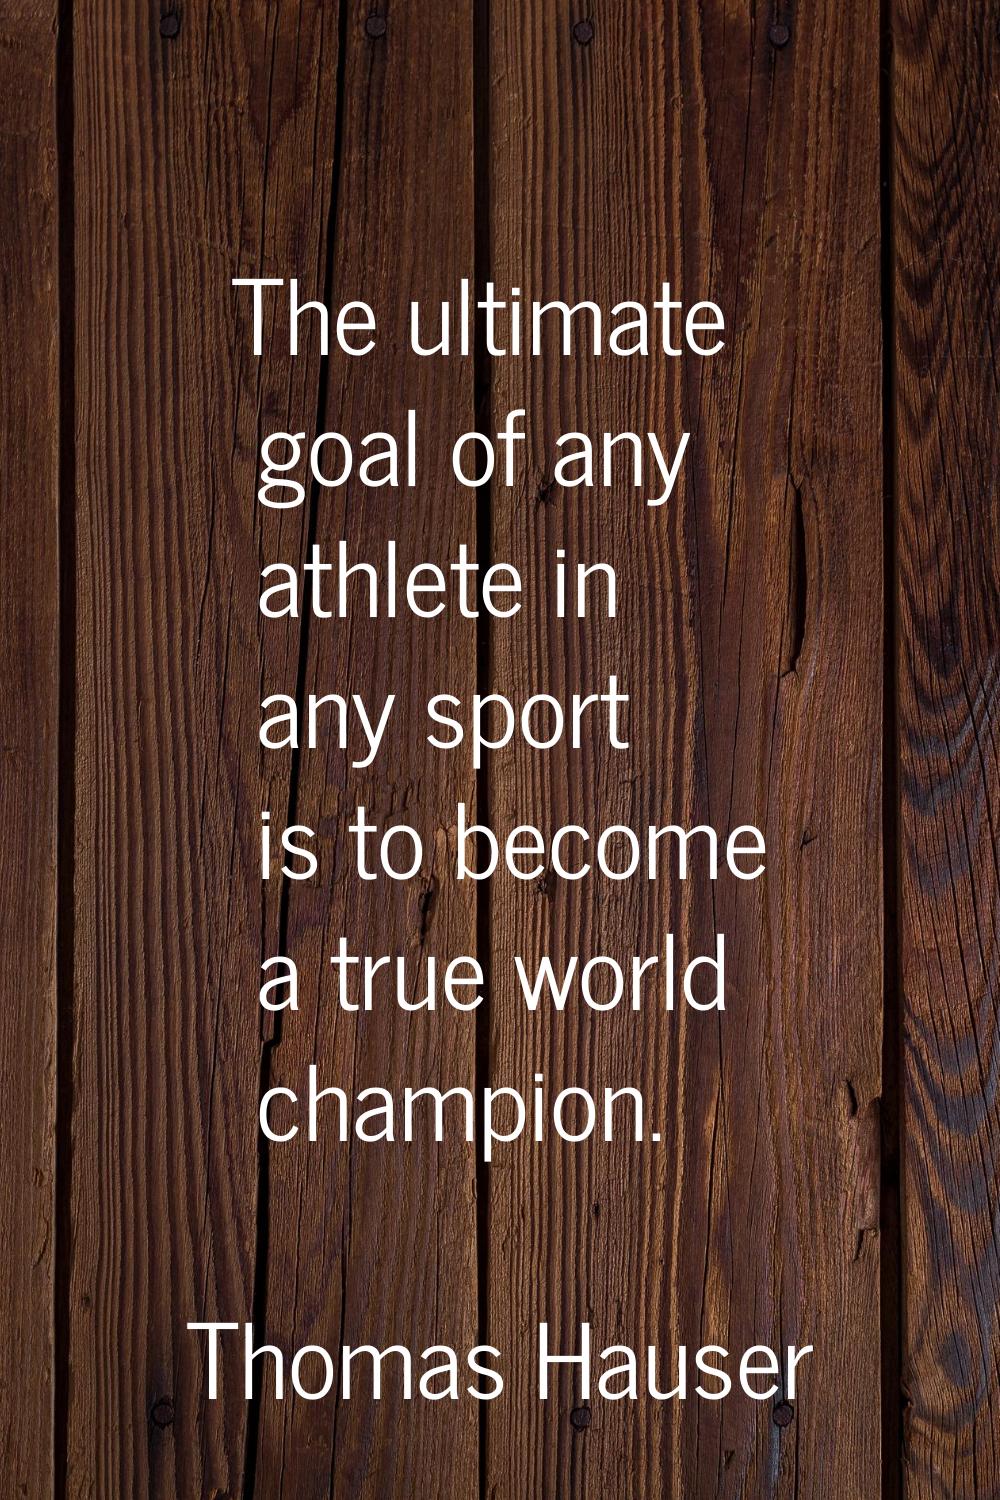 The ultimate goal of any athlete in any sport is to become a true world champion.